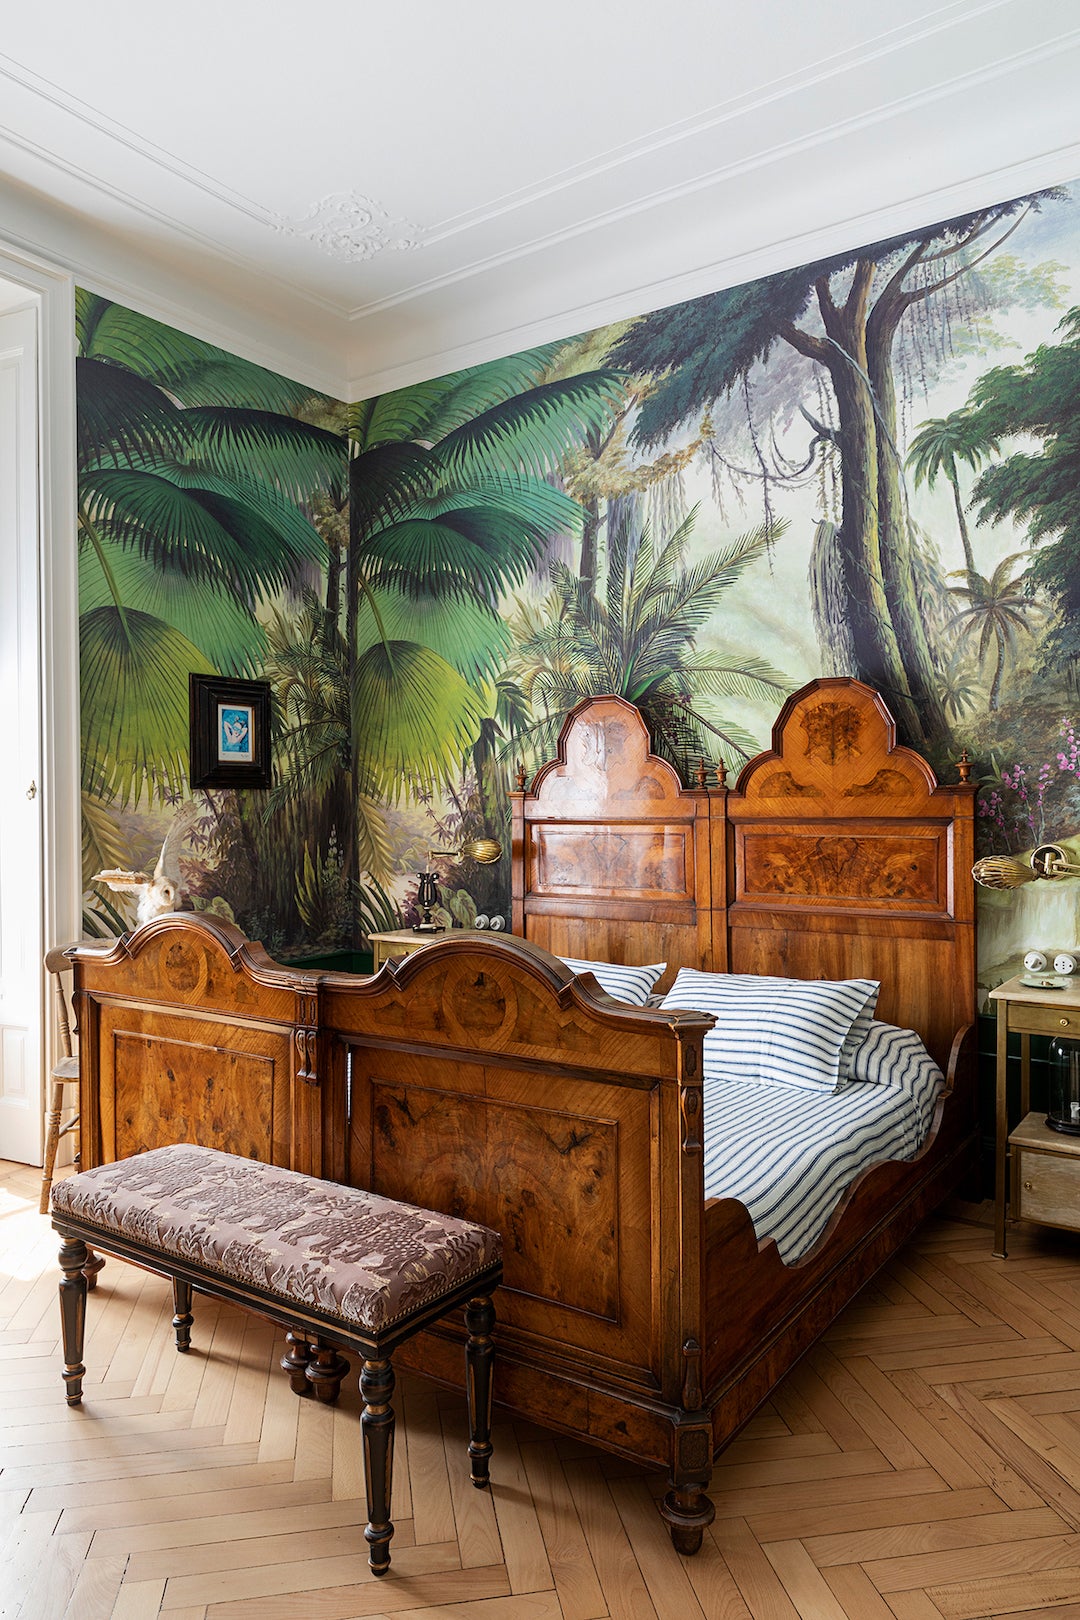 Vintage bed with mural of a jungle